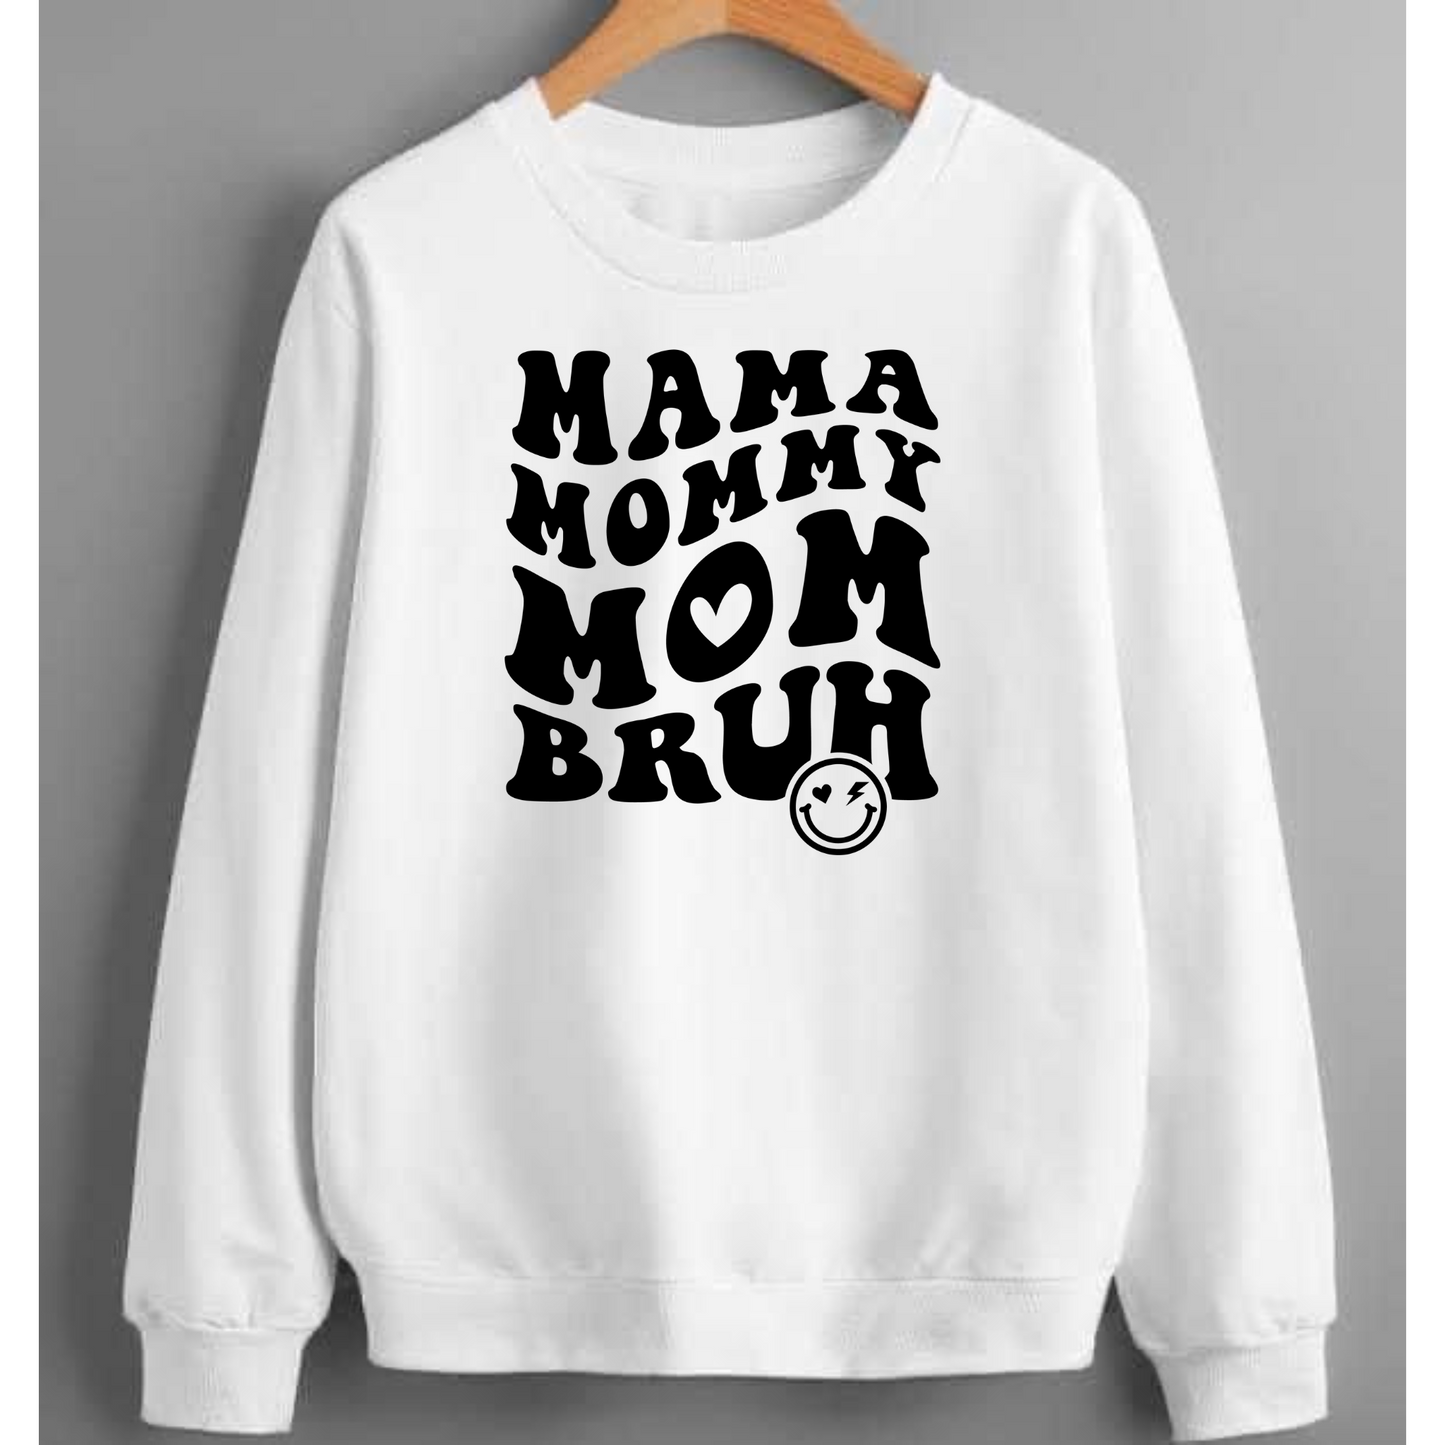 Mom Bruh Unisex Crewneck Sweatshirt Our sweatshirts are made of a heavy, yet soft and breathable material that maintains it's shape and size. Pair it with your favourite jeans or joggers for a casual look. White